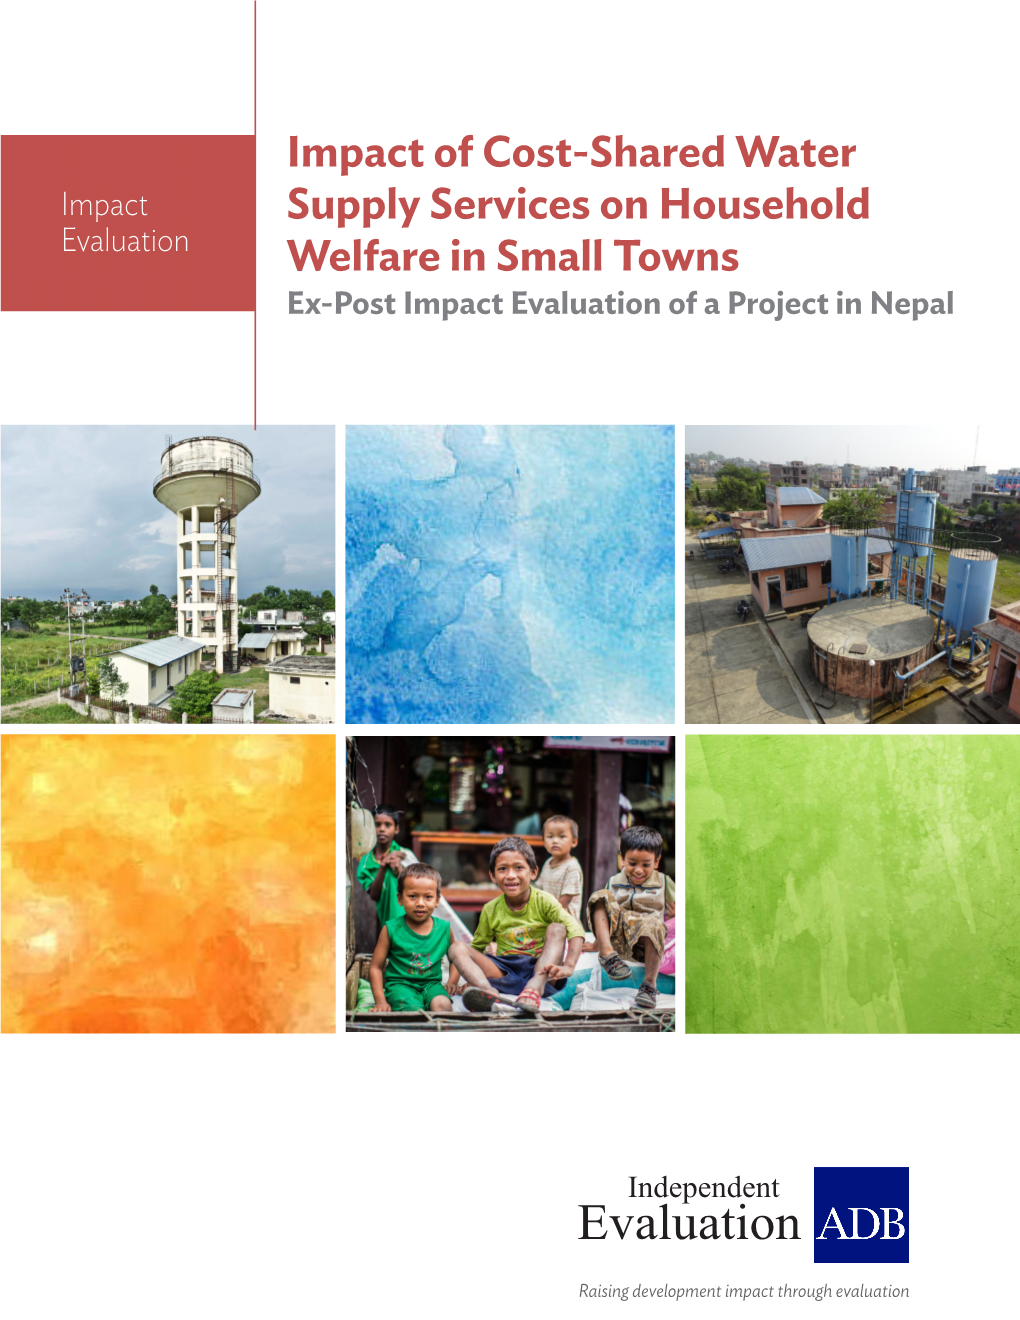 Ex-Post Impact Evaluation of a Project in Nepal